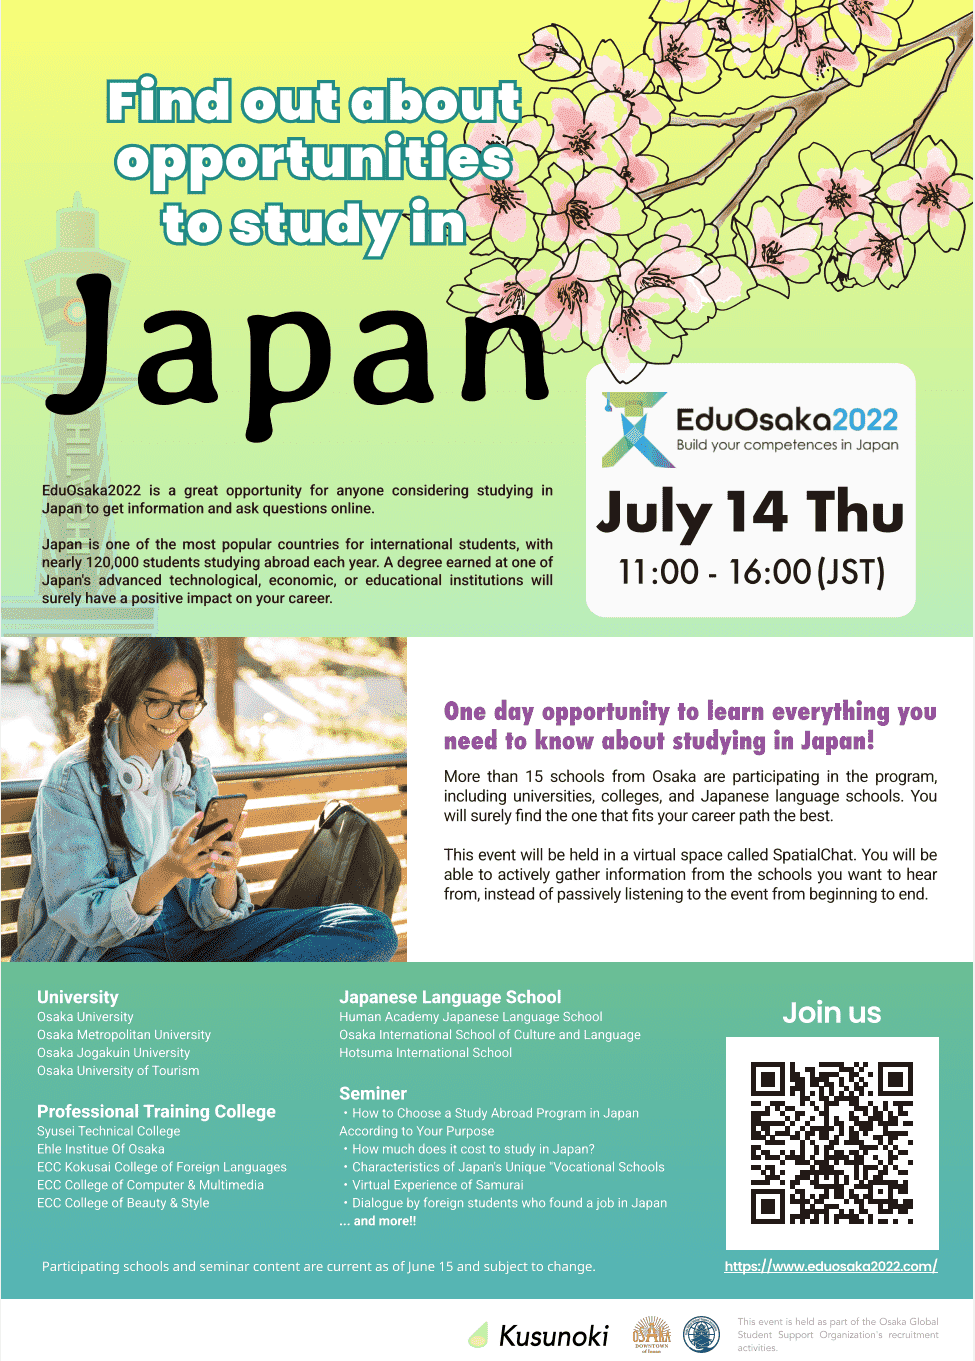 Find out about opportunities to study in Japan